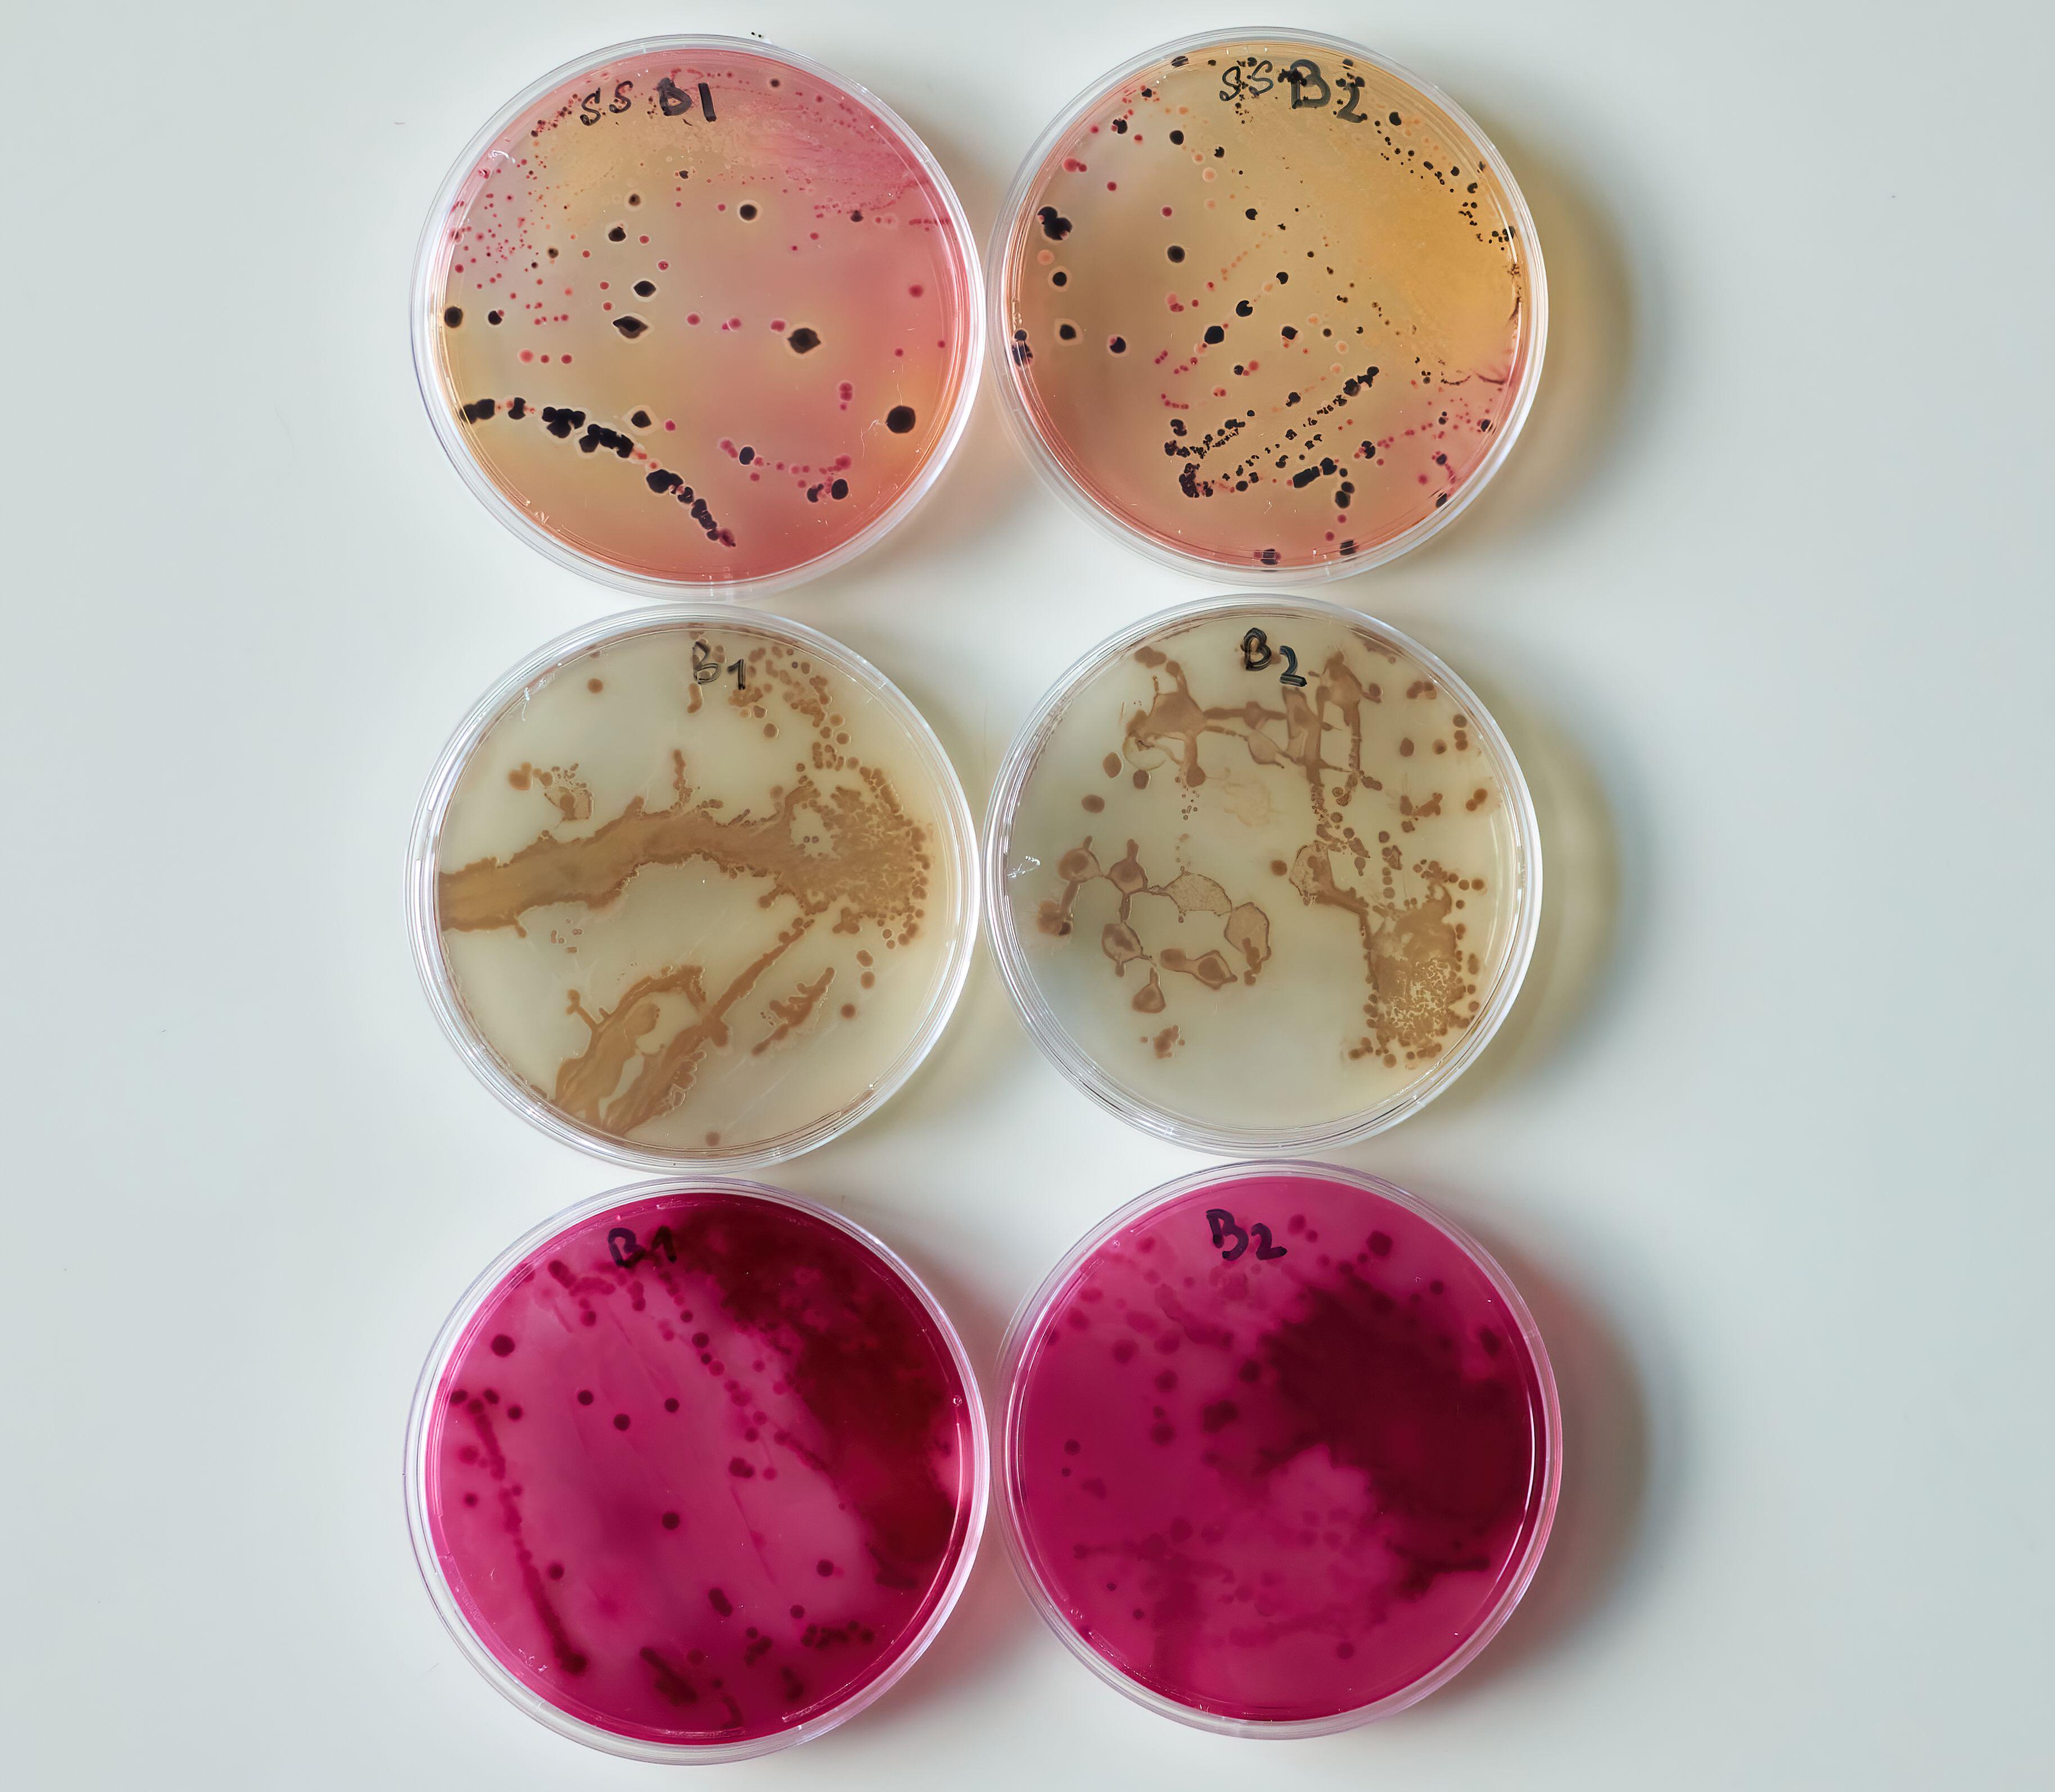 Bacterial colony in petri dishes (Alamy/PA)